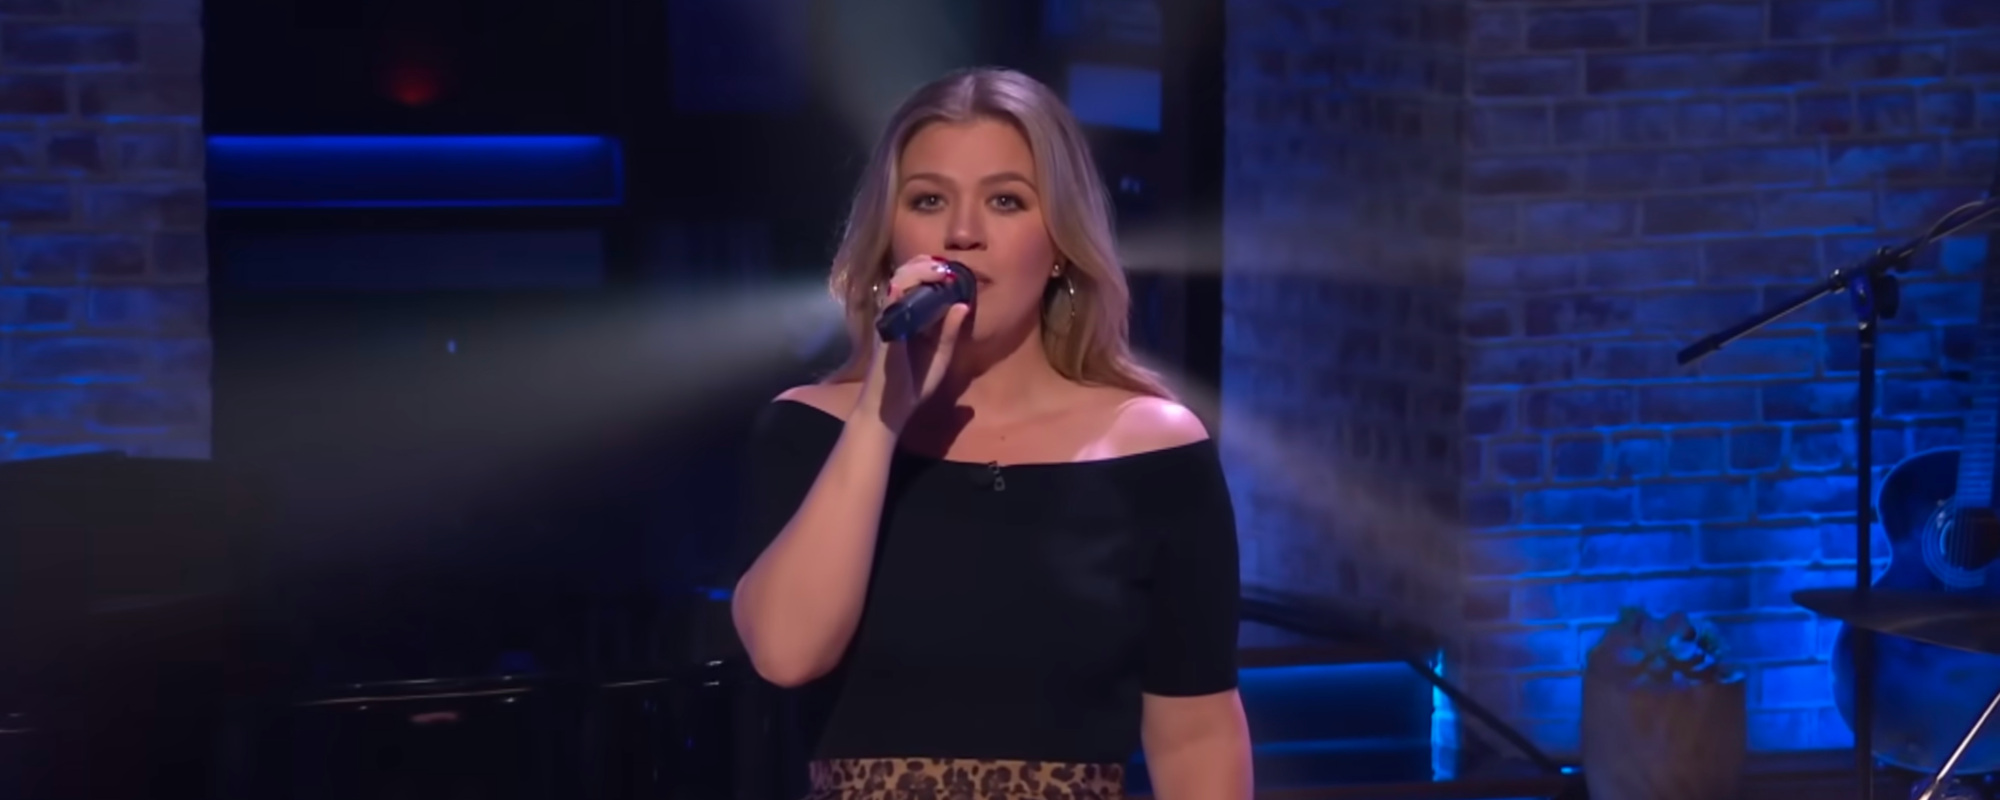 Watch: Kelly Clarkson Sings “Love, You Didn’t Do Right by Me” from ‘White Christmas’ During Kellyoke Segment